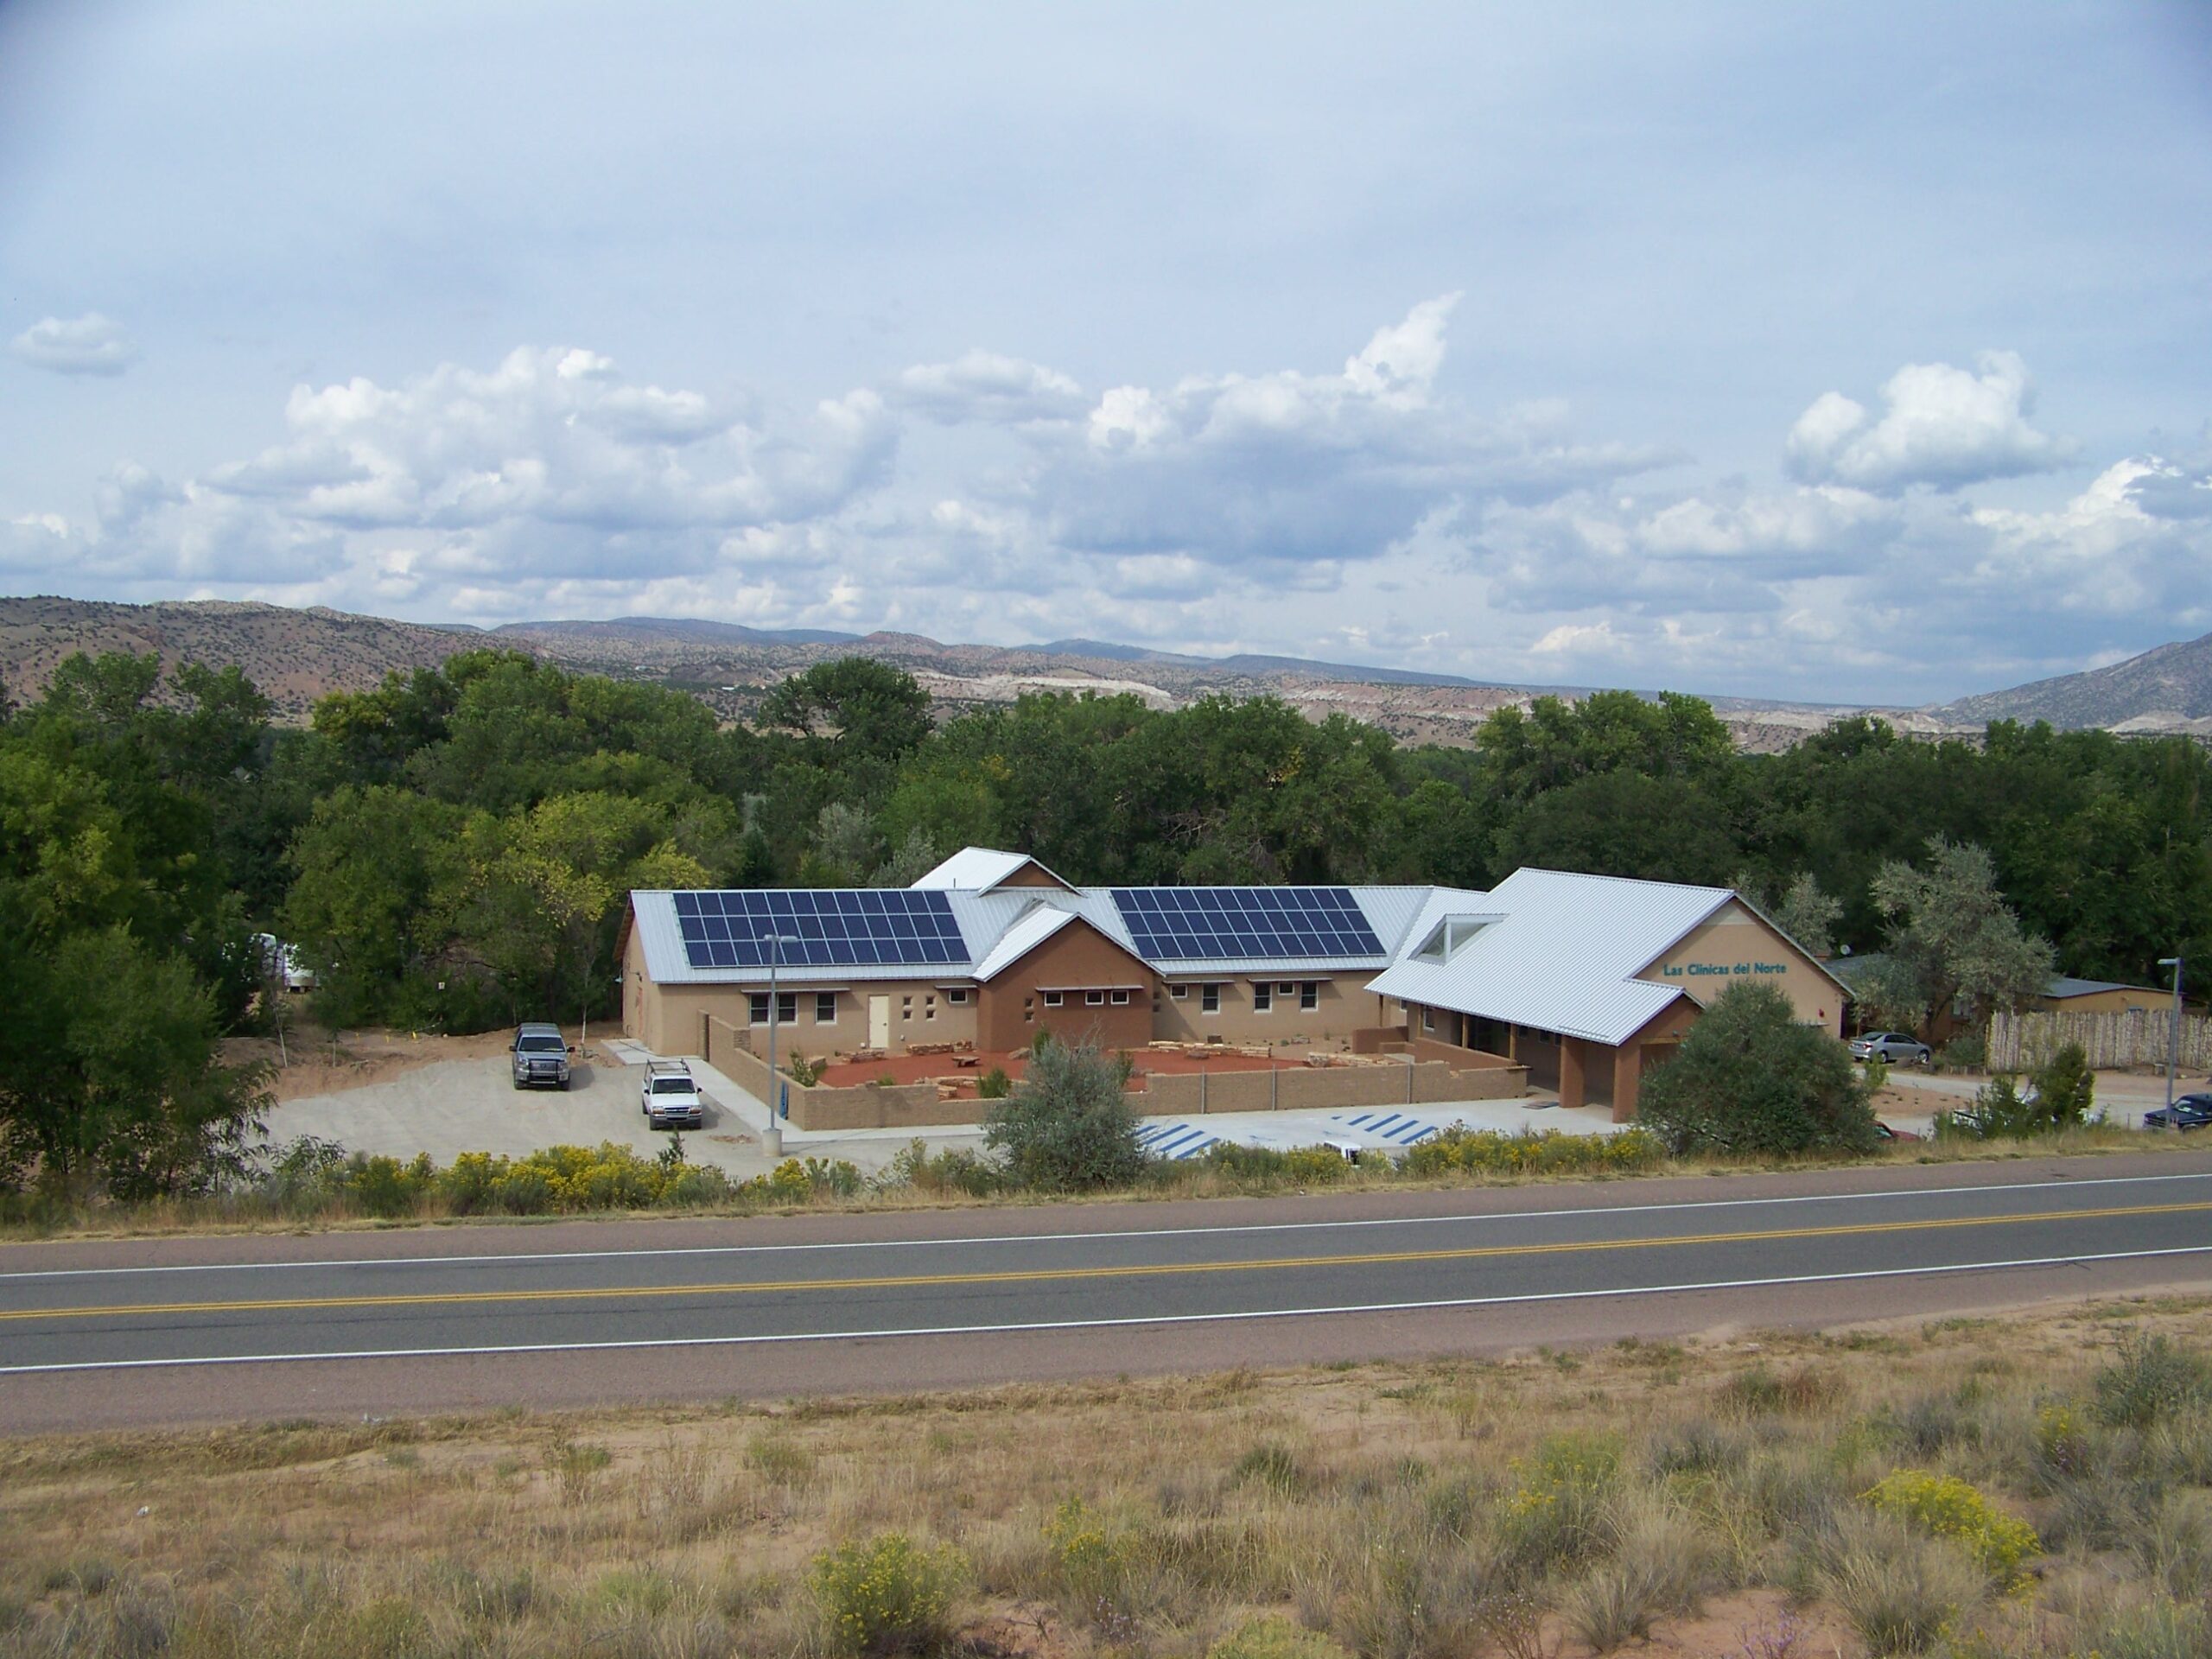 Abiquiu clinic set in Northern New Mexico - solar panels and traditional forms with contemporary architecture